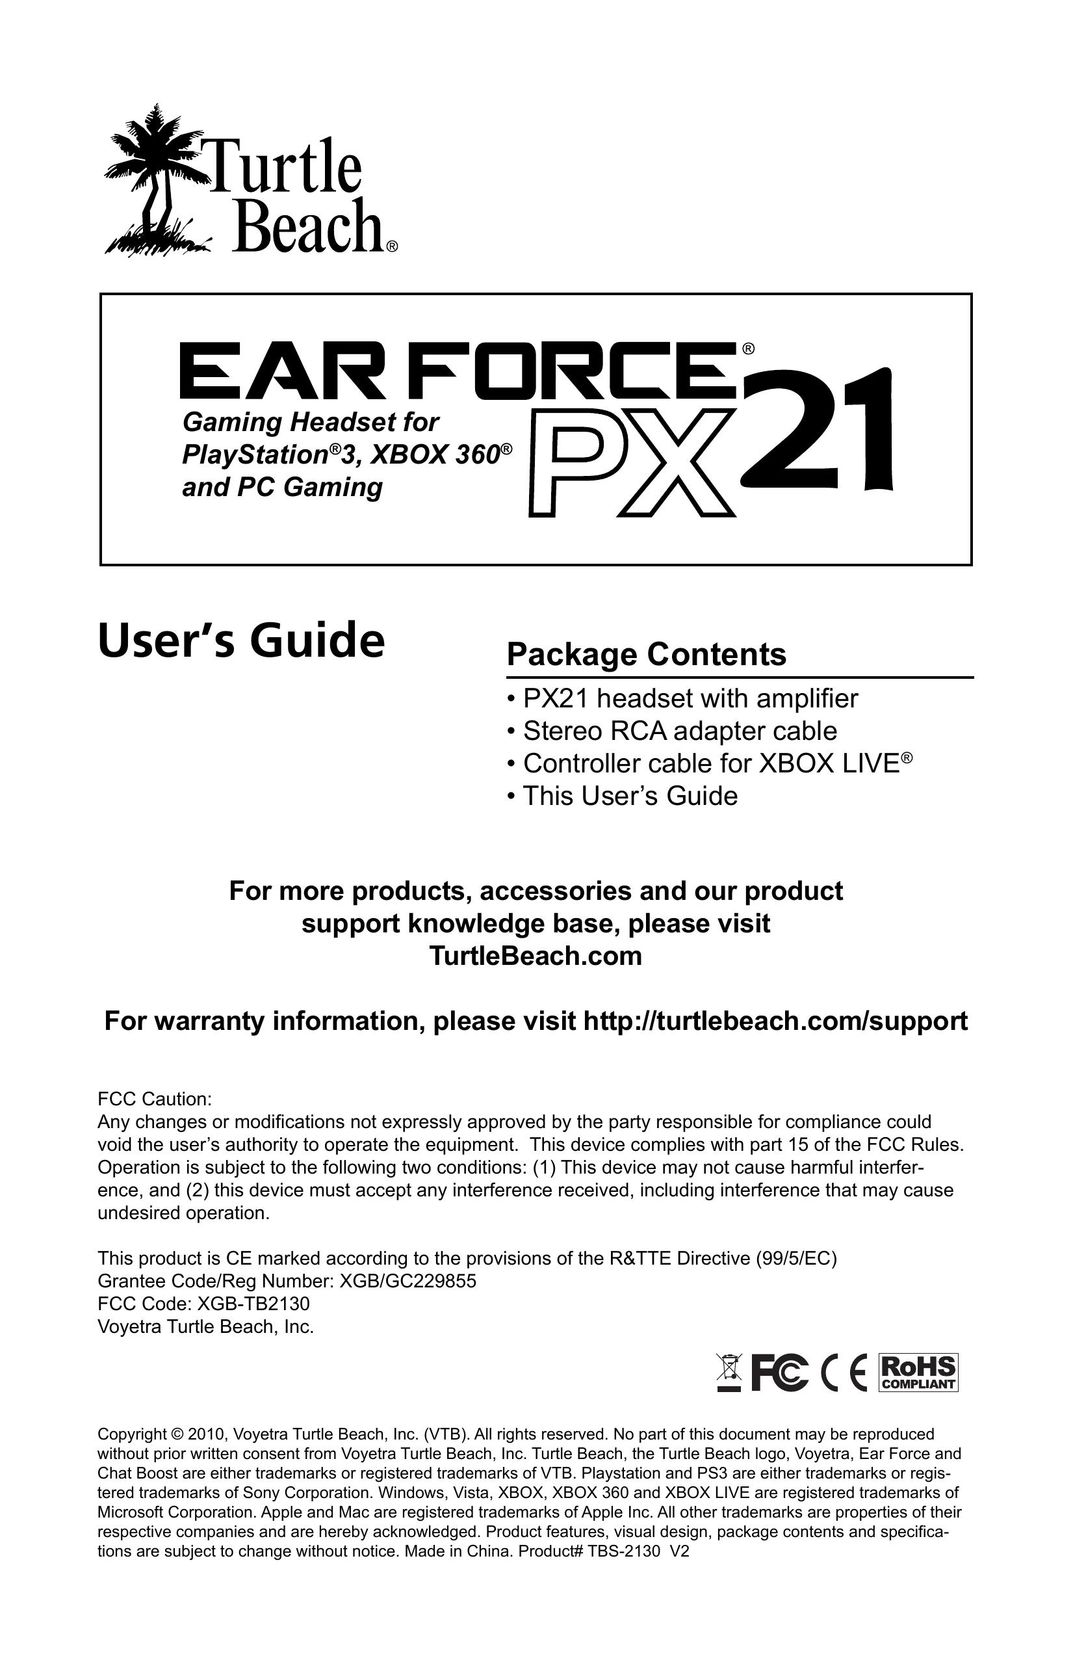 Turtle Beach PX21 Video Game Headset User Manual